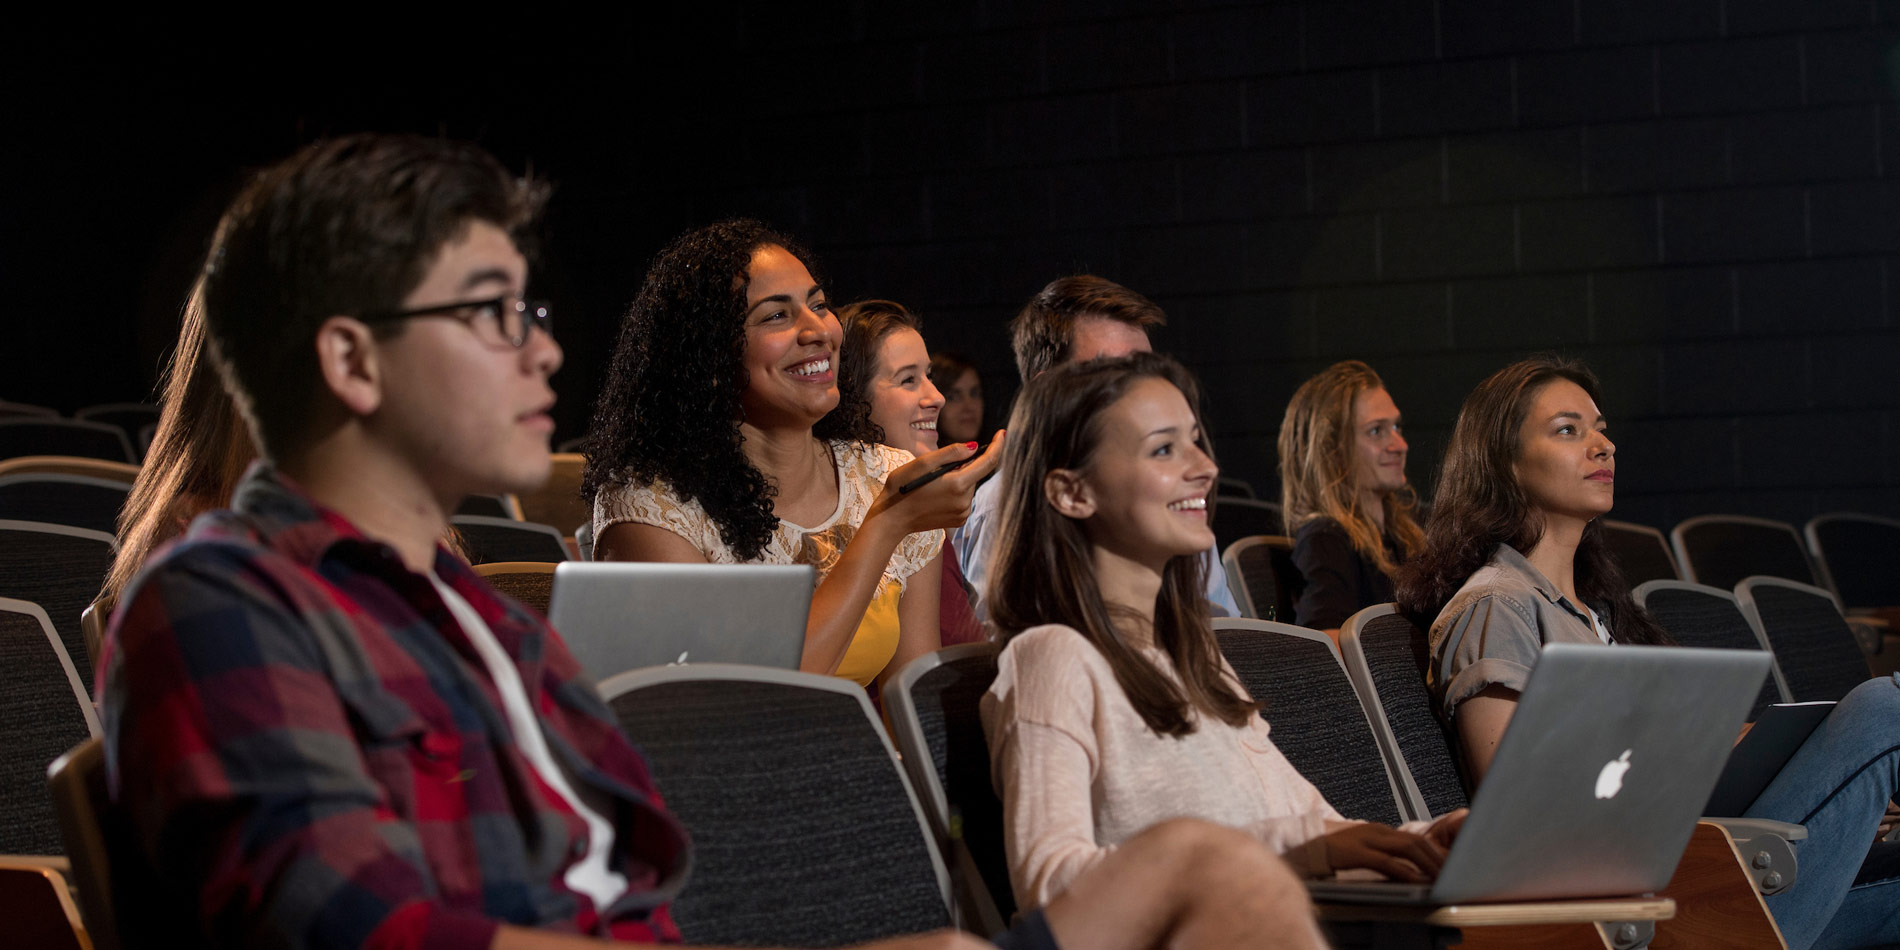 Students listening to a lecture in a theater